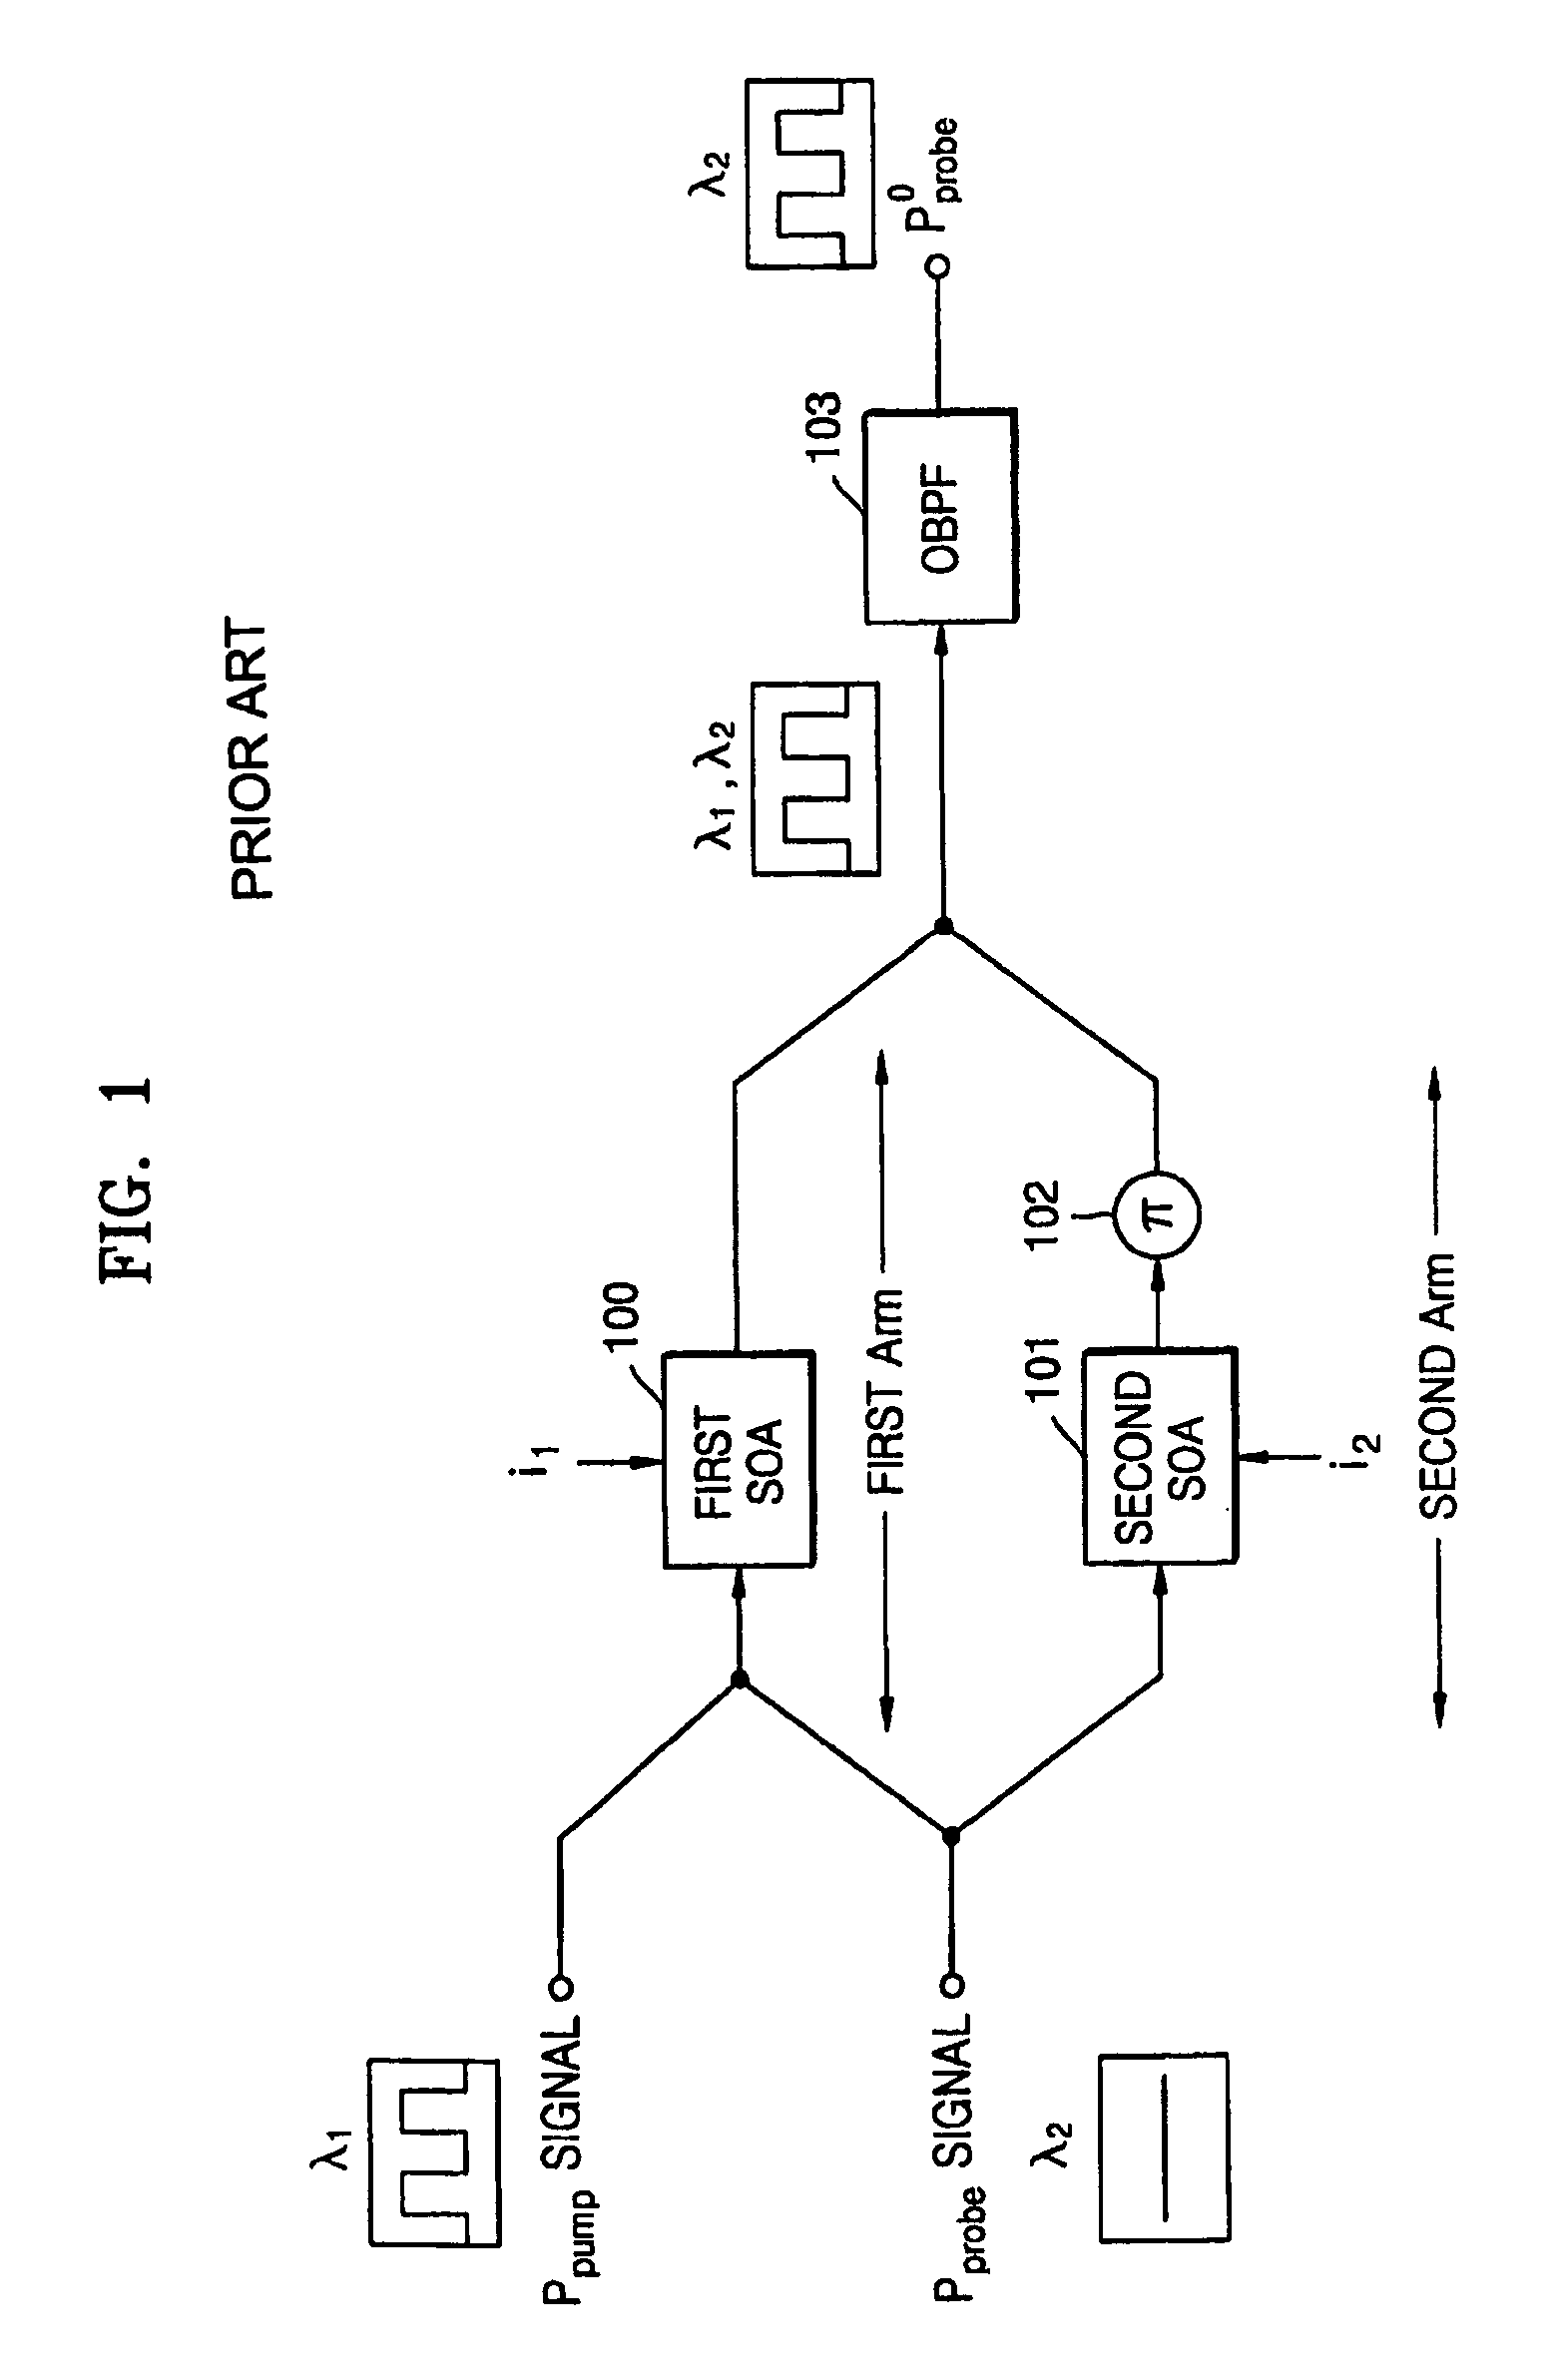 Phase optimization apparatus and method for obtaining maximum extinction ratio in mach-zehnder interferometer wavelength converter using cross phase modulation of semiconductor optical amplifier